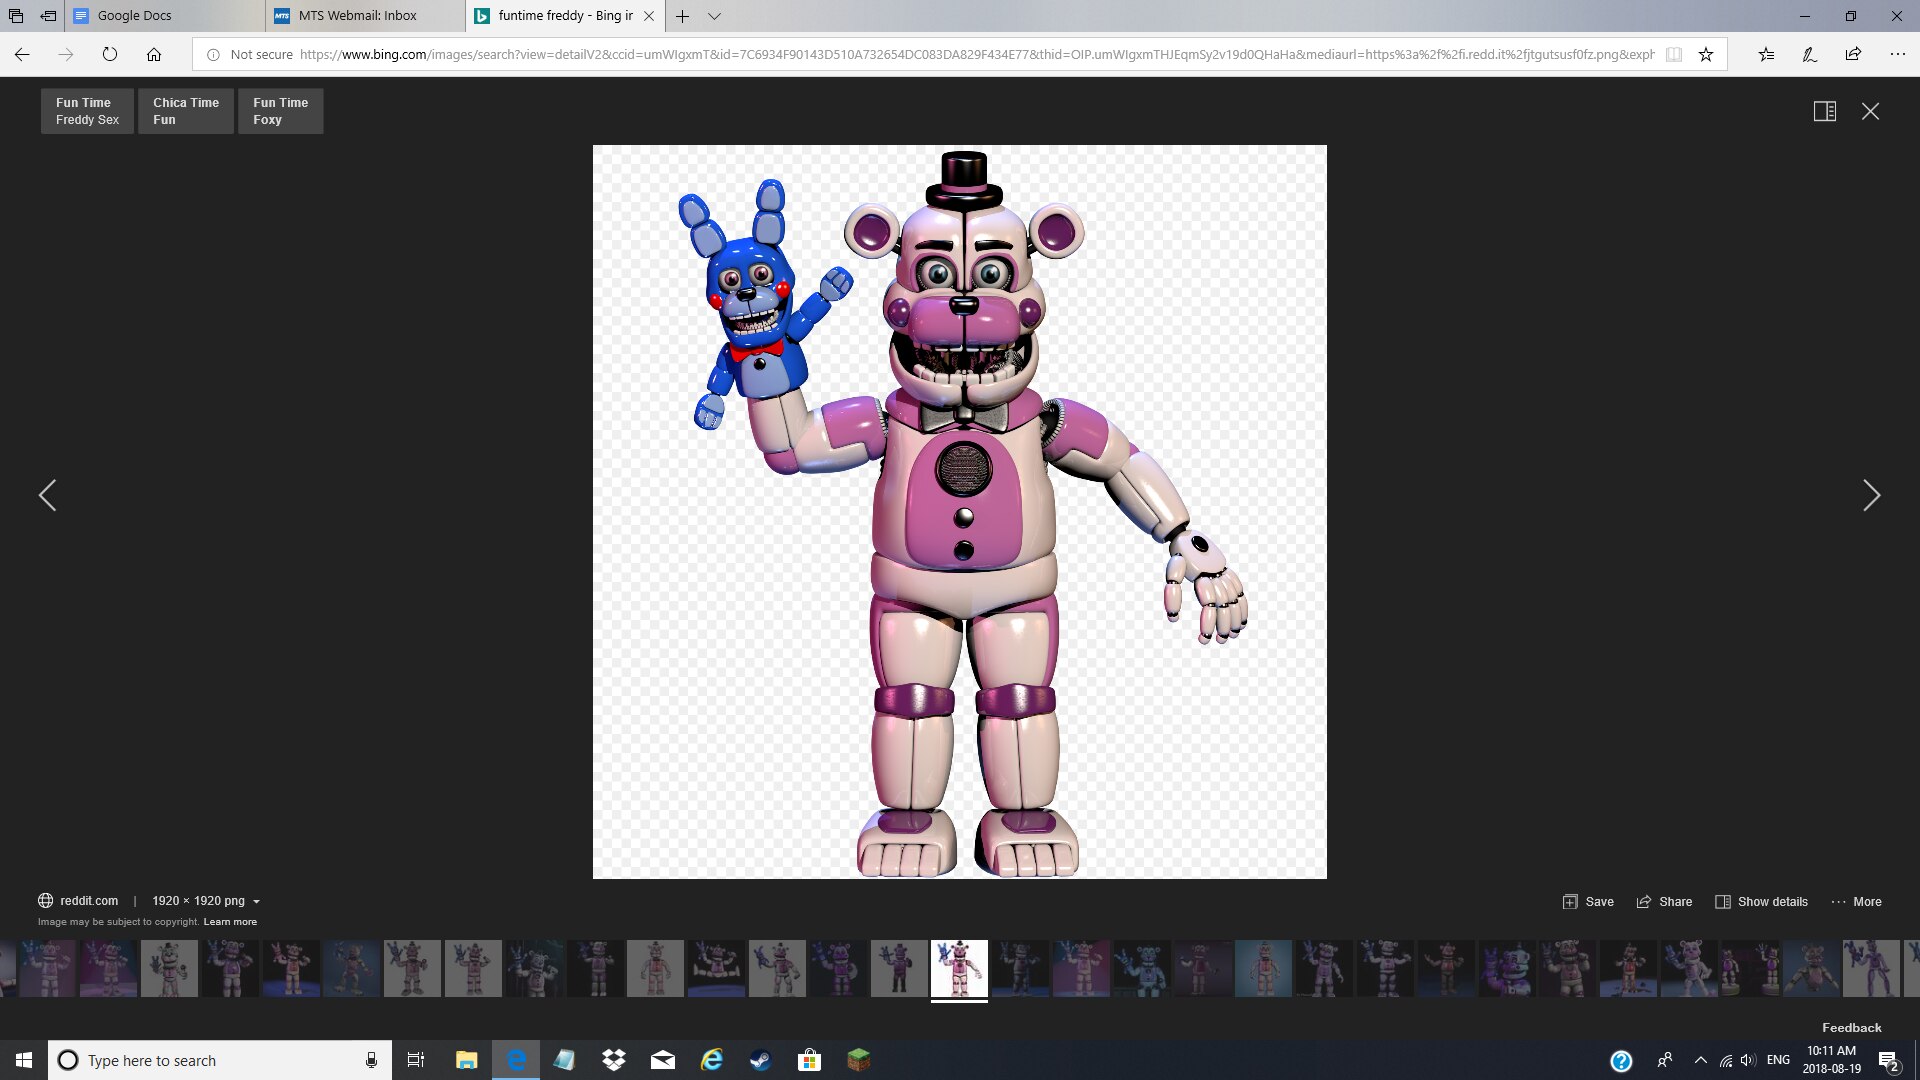 Five Nights at Freddy's targets young fans with PG-13 rating - Xfire